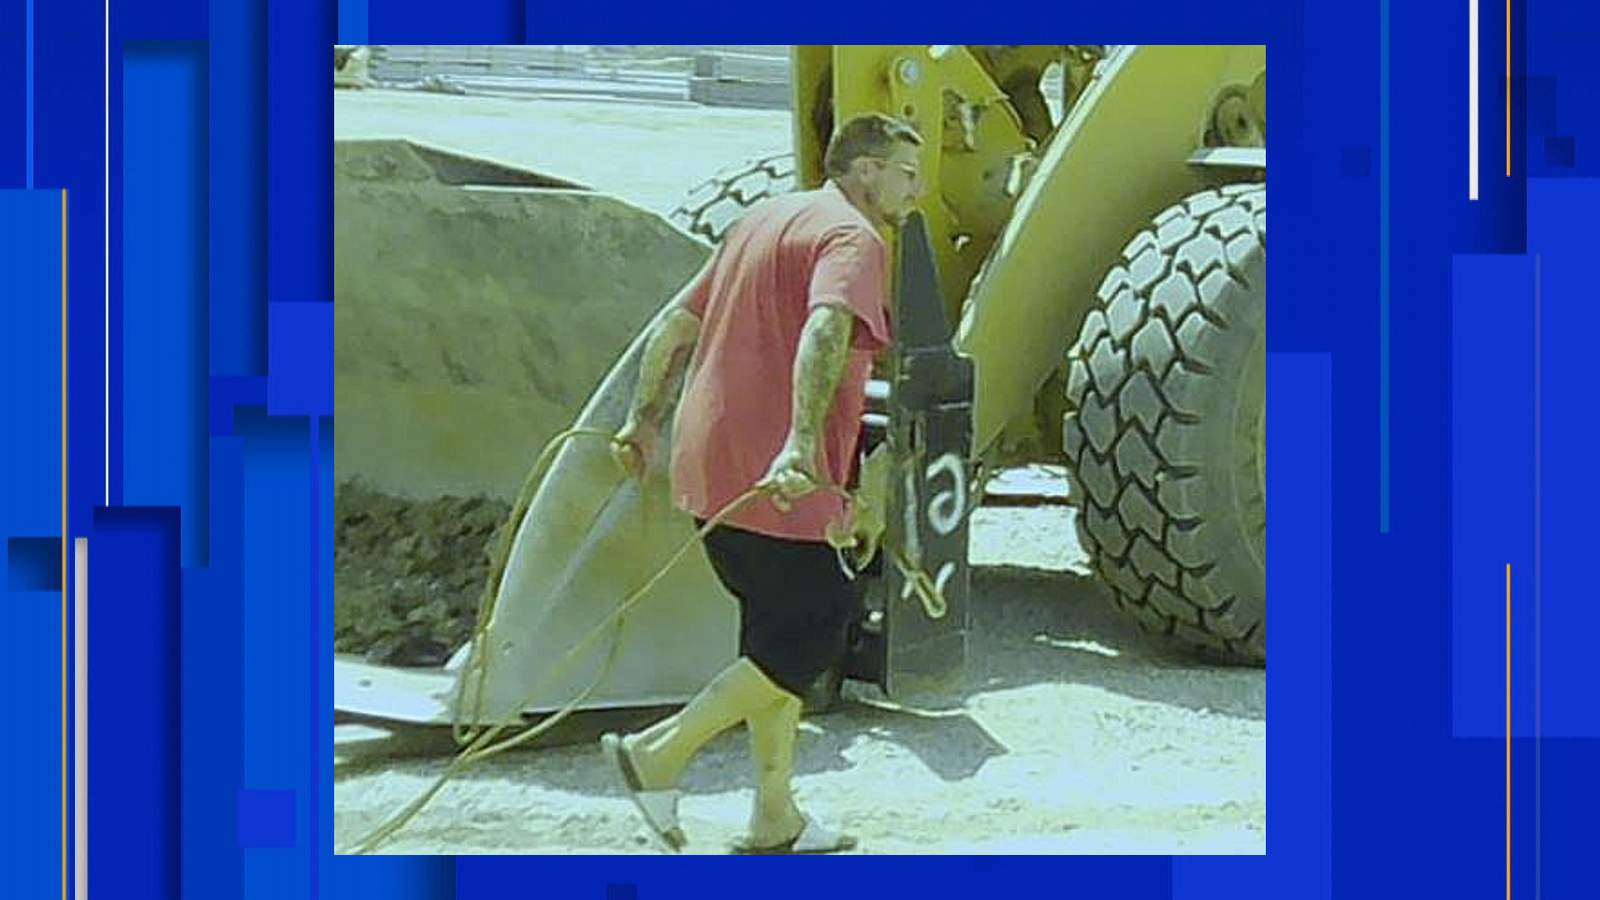 Police seek man wanted for stealing construction equipment at site in Van Buren Township